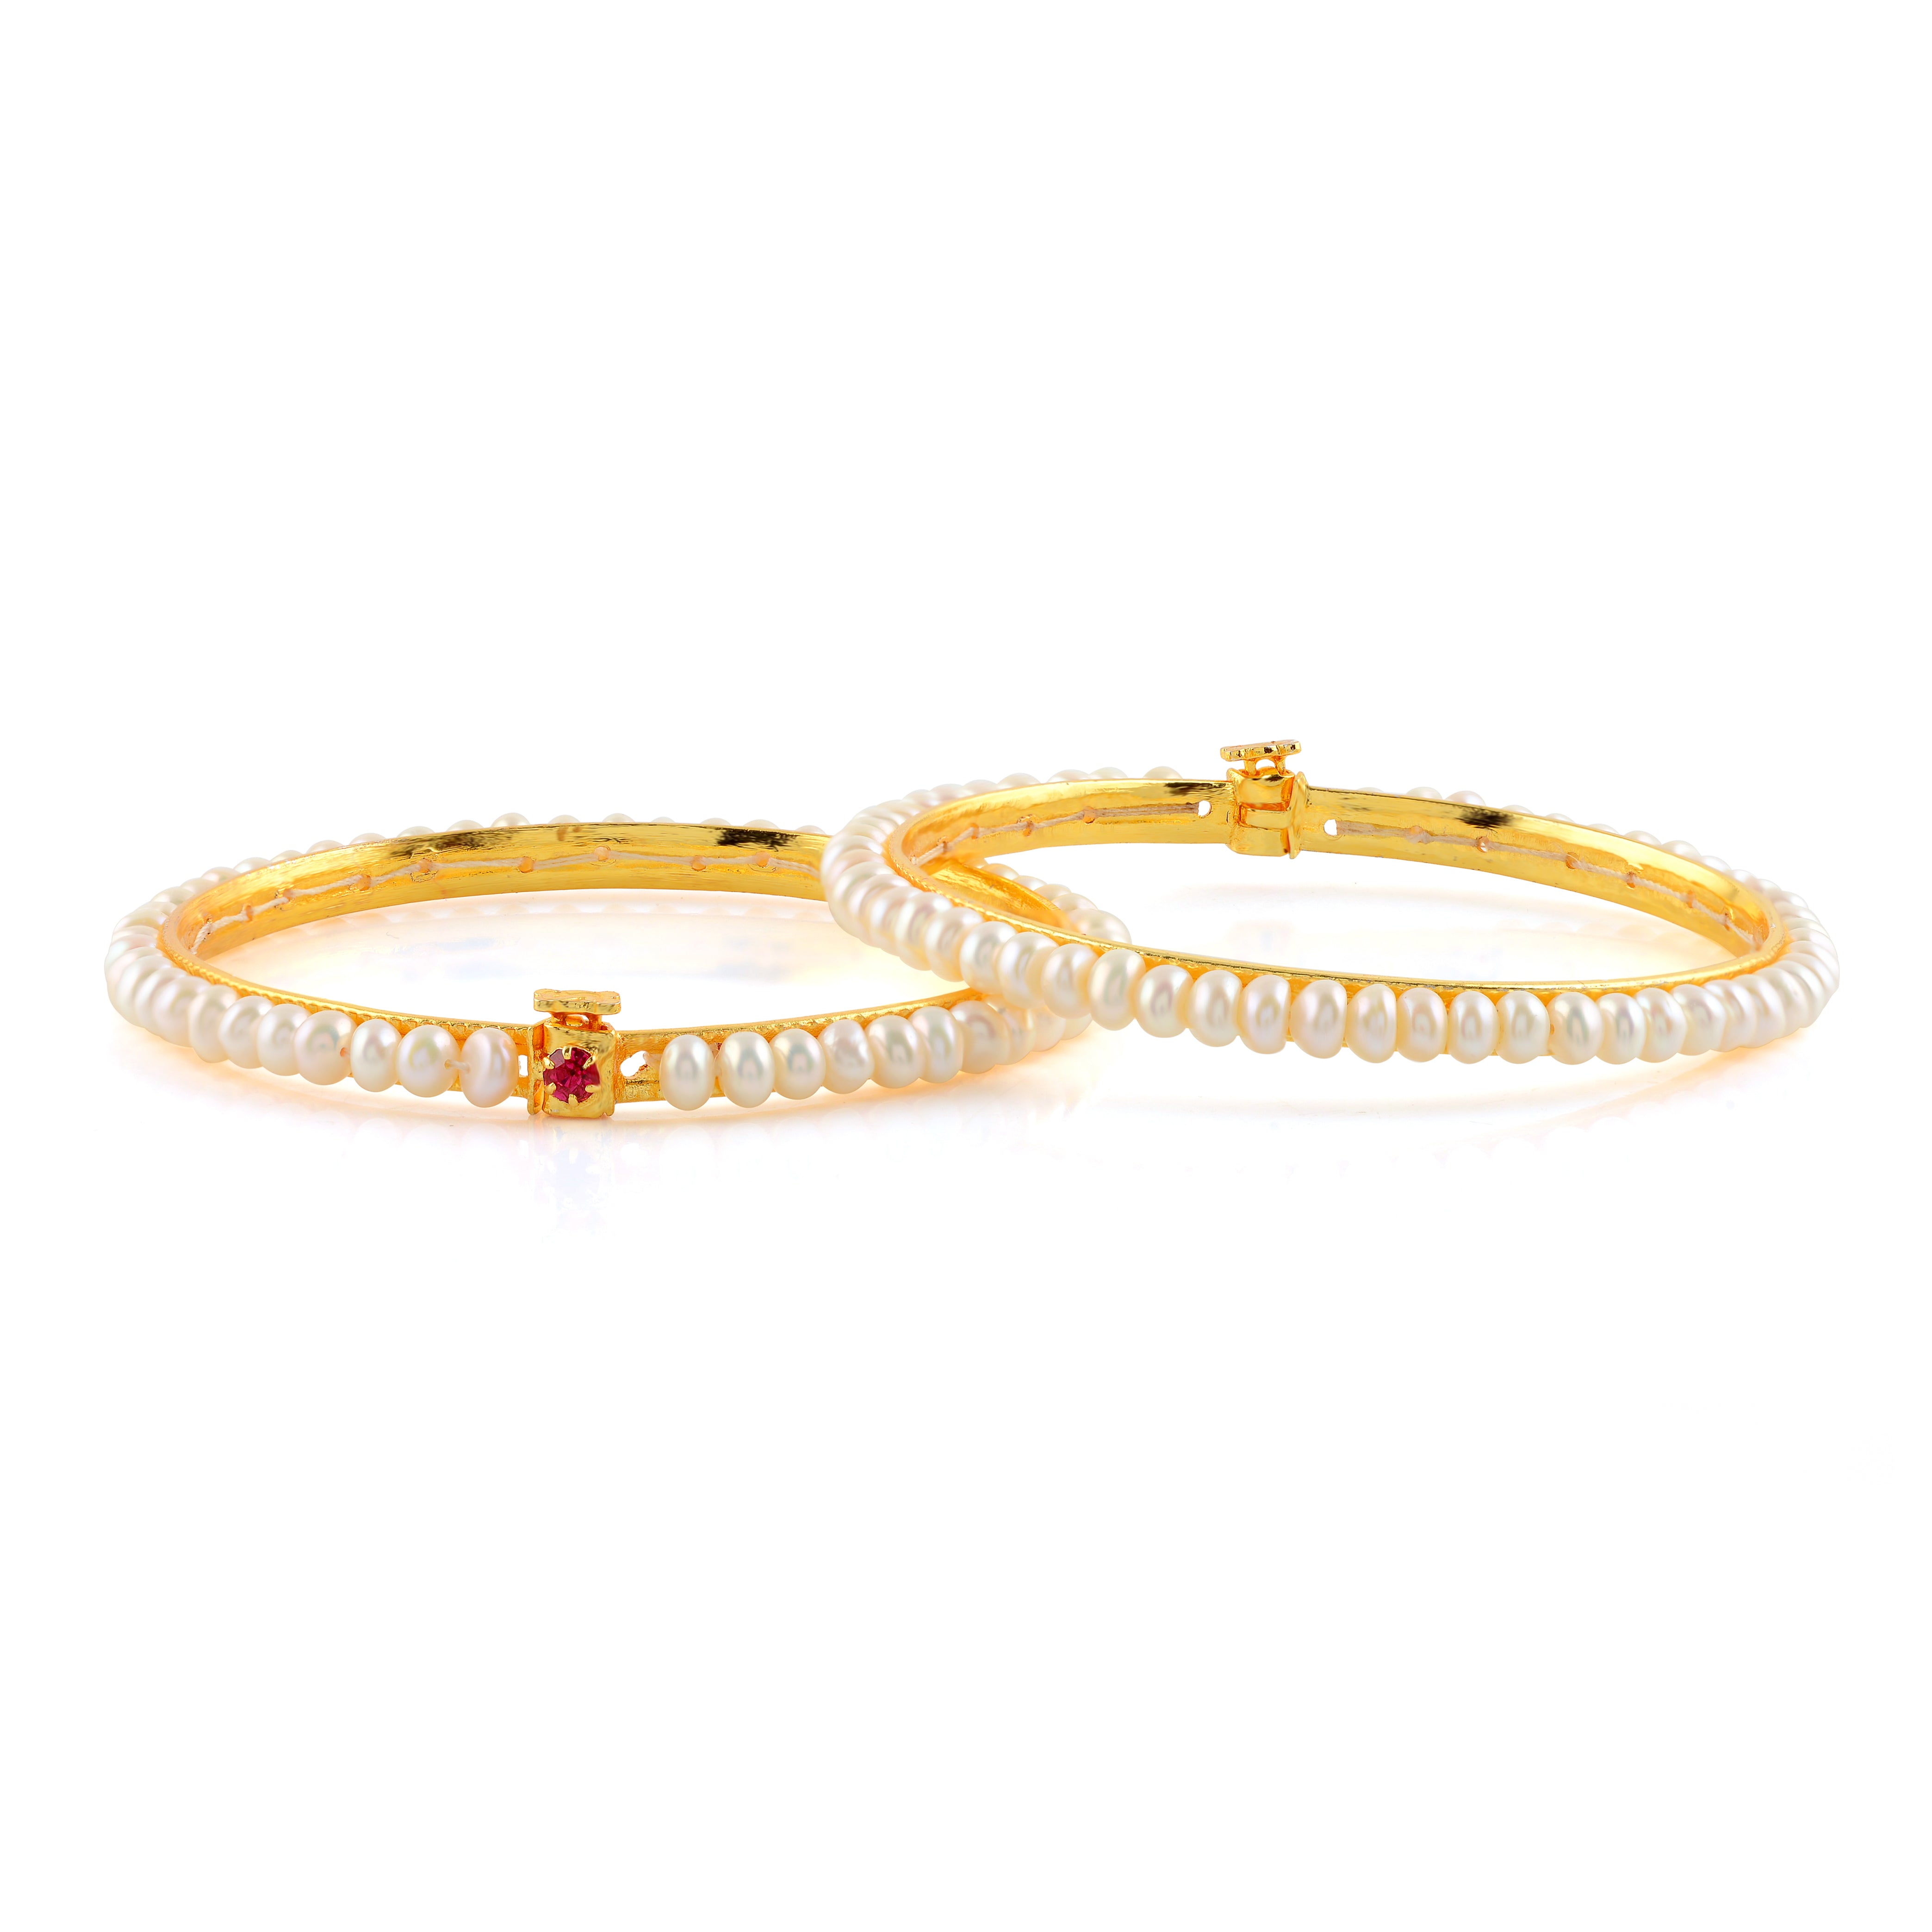 Elegant White Pearl Bangles with Sparkling Red Stones - Krishna Jewellers Pearls and Gems